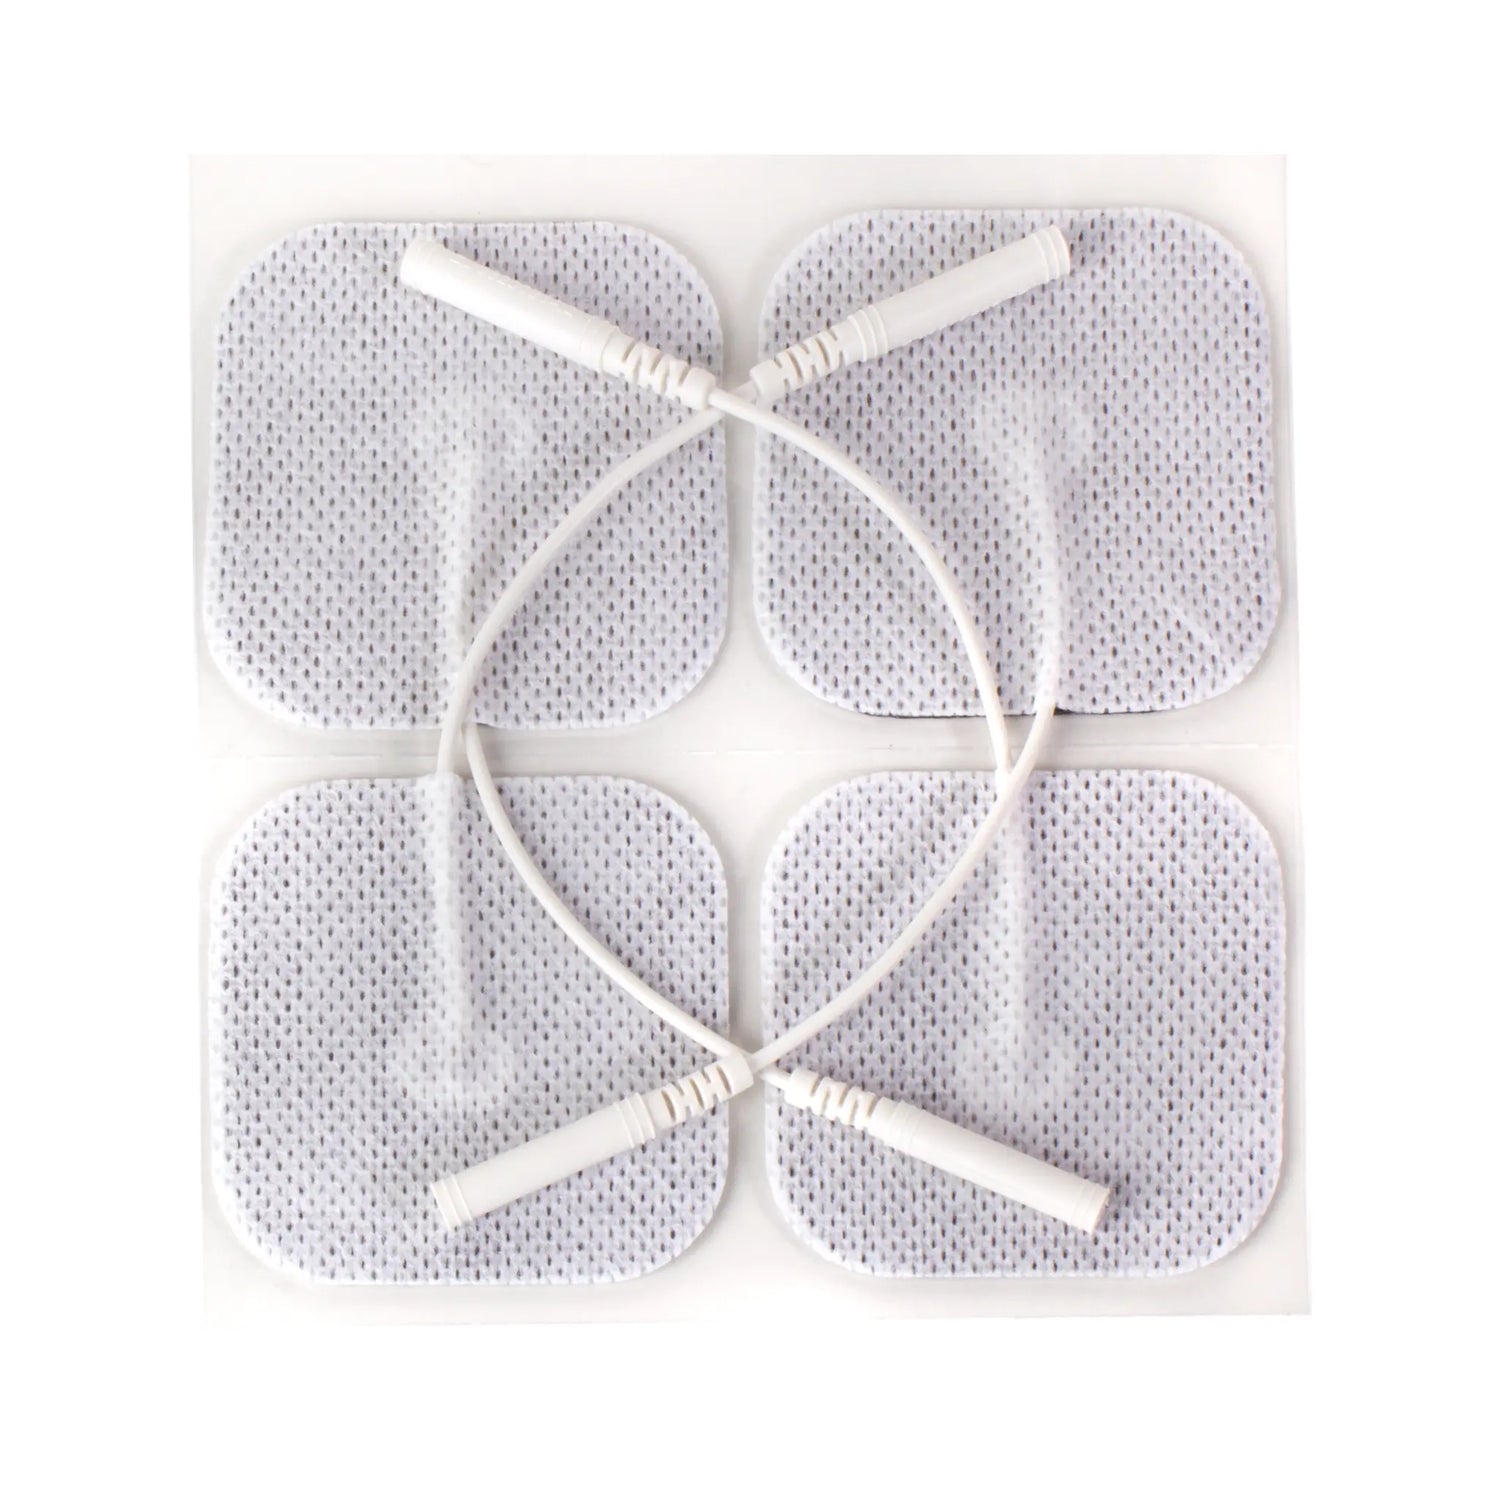 Conductive Pads - 2x2&quot; Square Clinical Grade